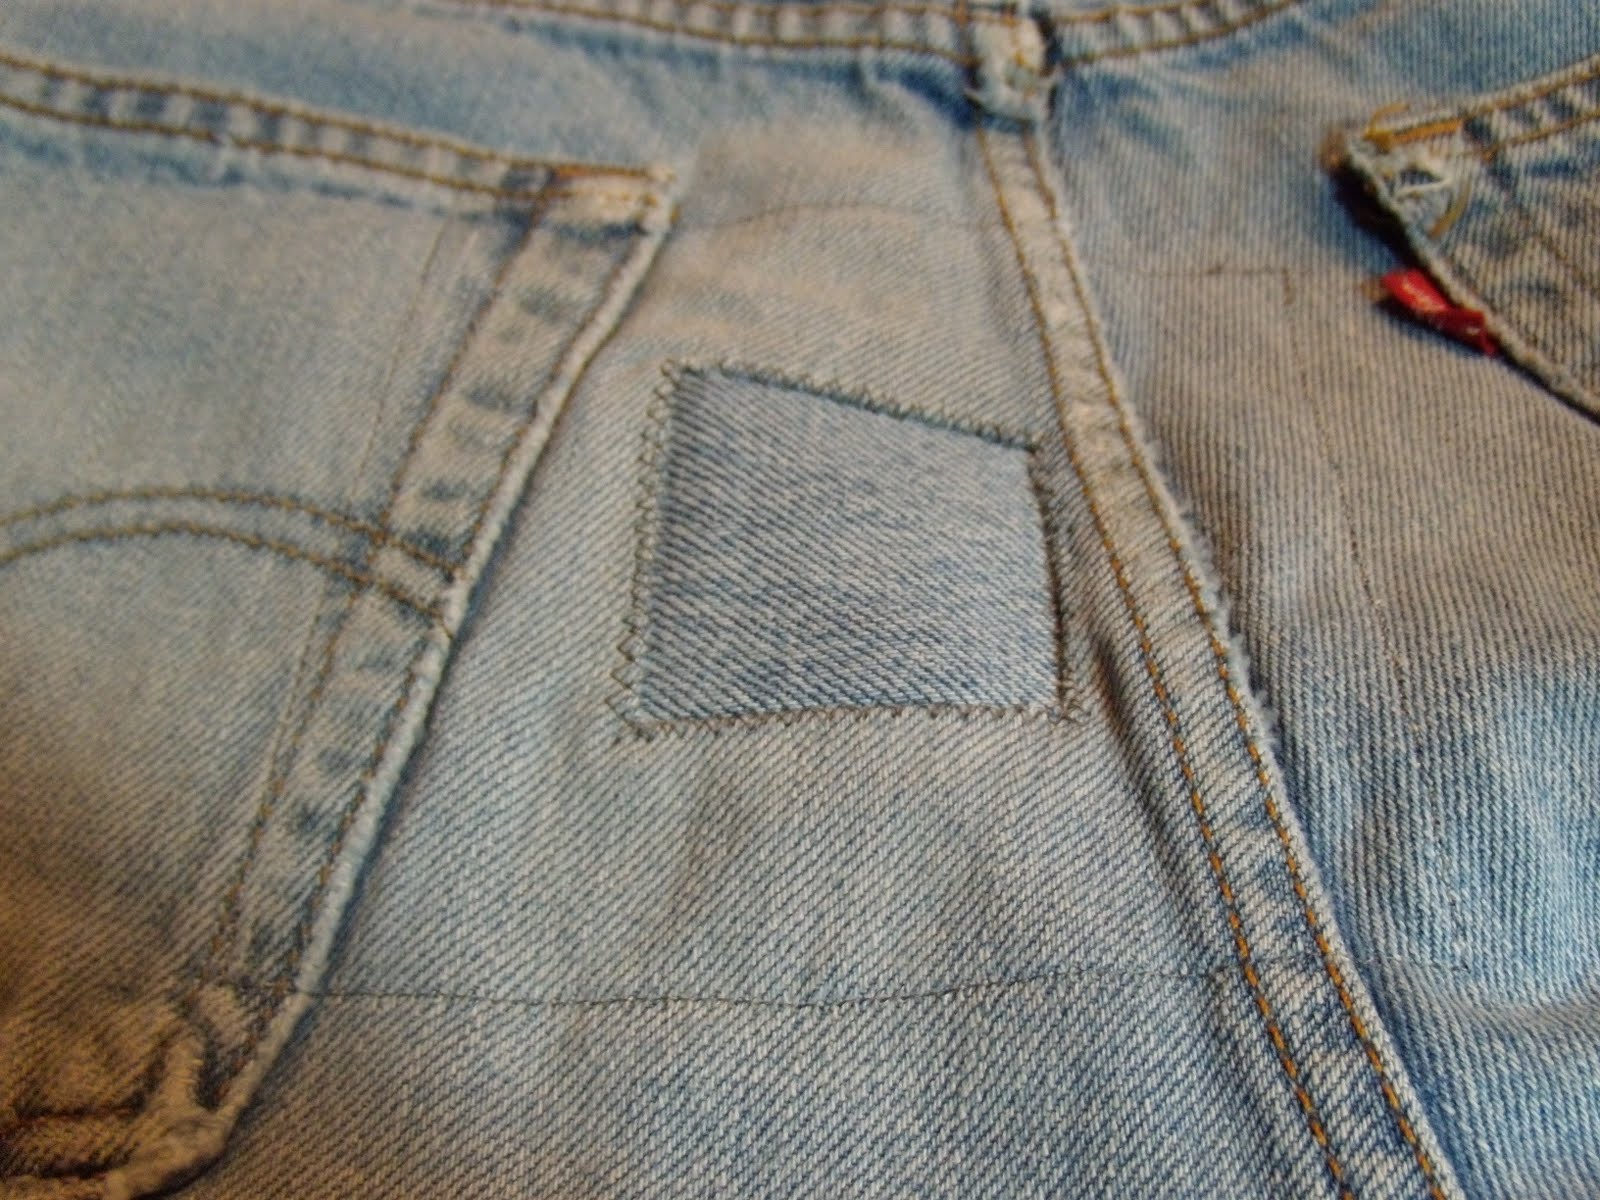 How to Repair a Hole in Clothes With Zigzag Stitch Techniques